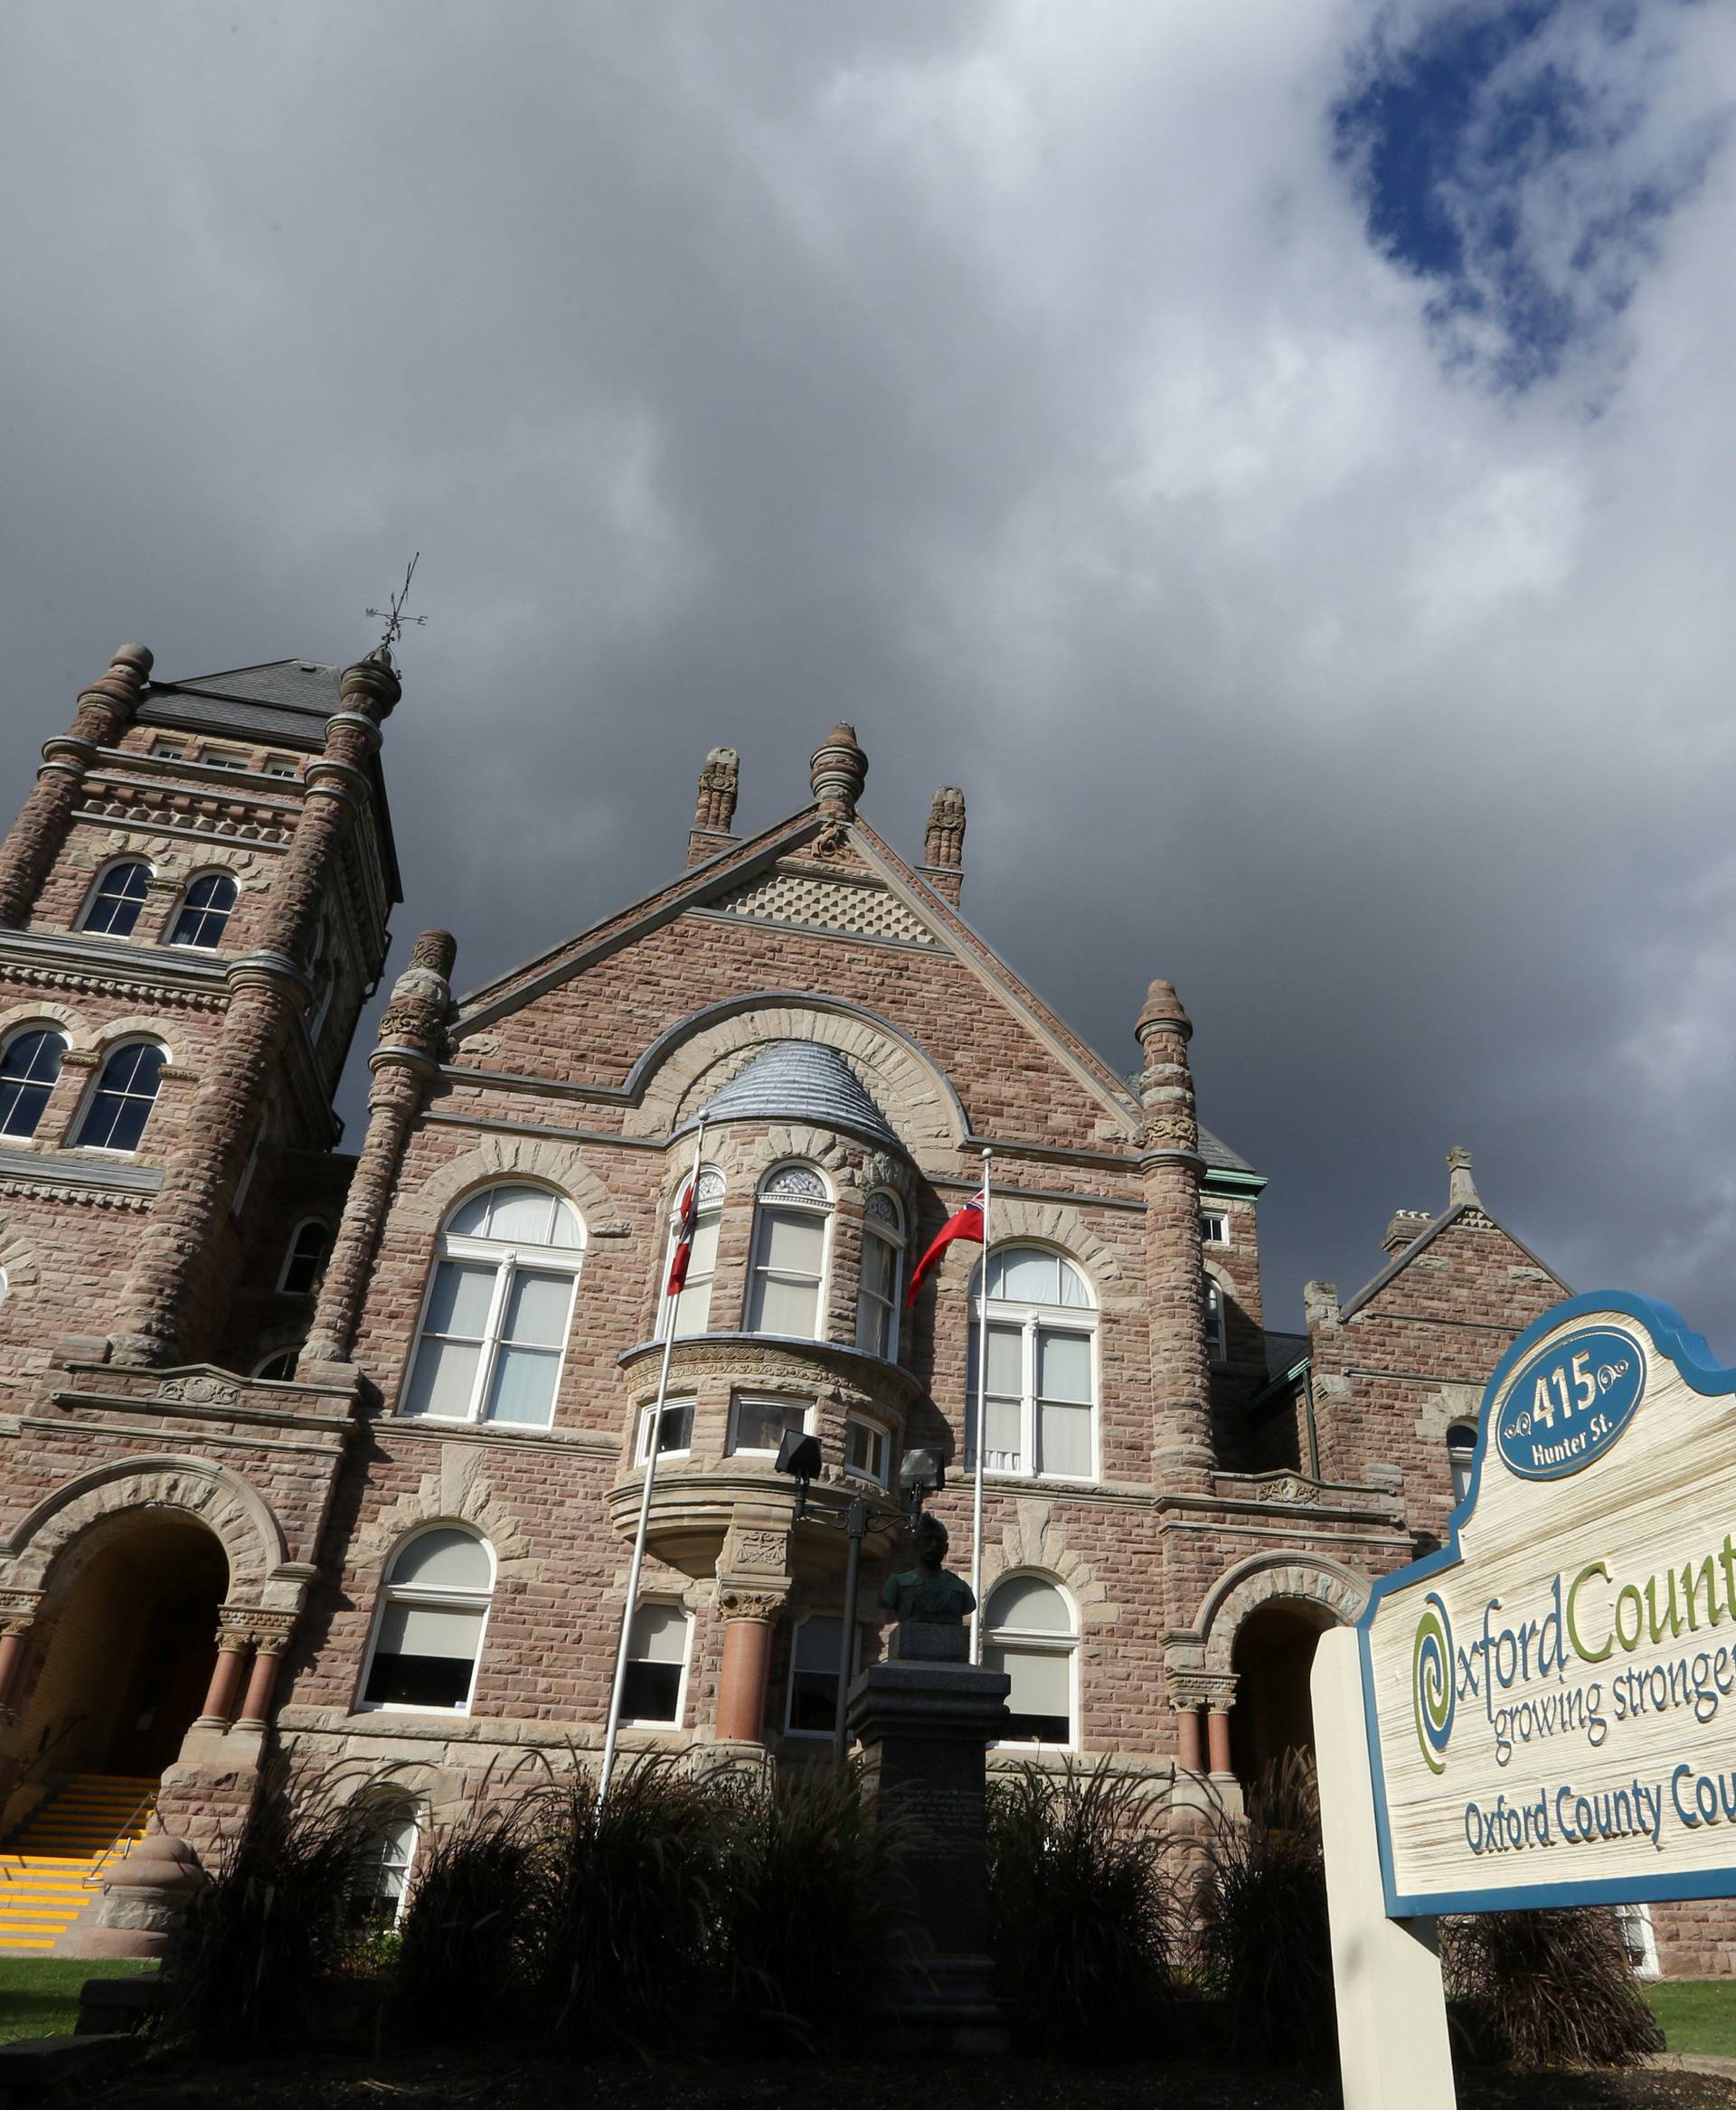 The courthouse in Woodstock, Ontario, where 49-year old nurse, Elizabeth Wettlaufer, appeared before a judge